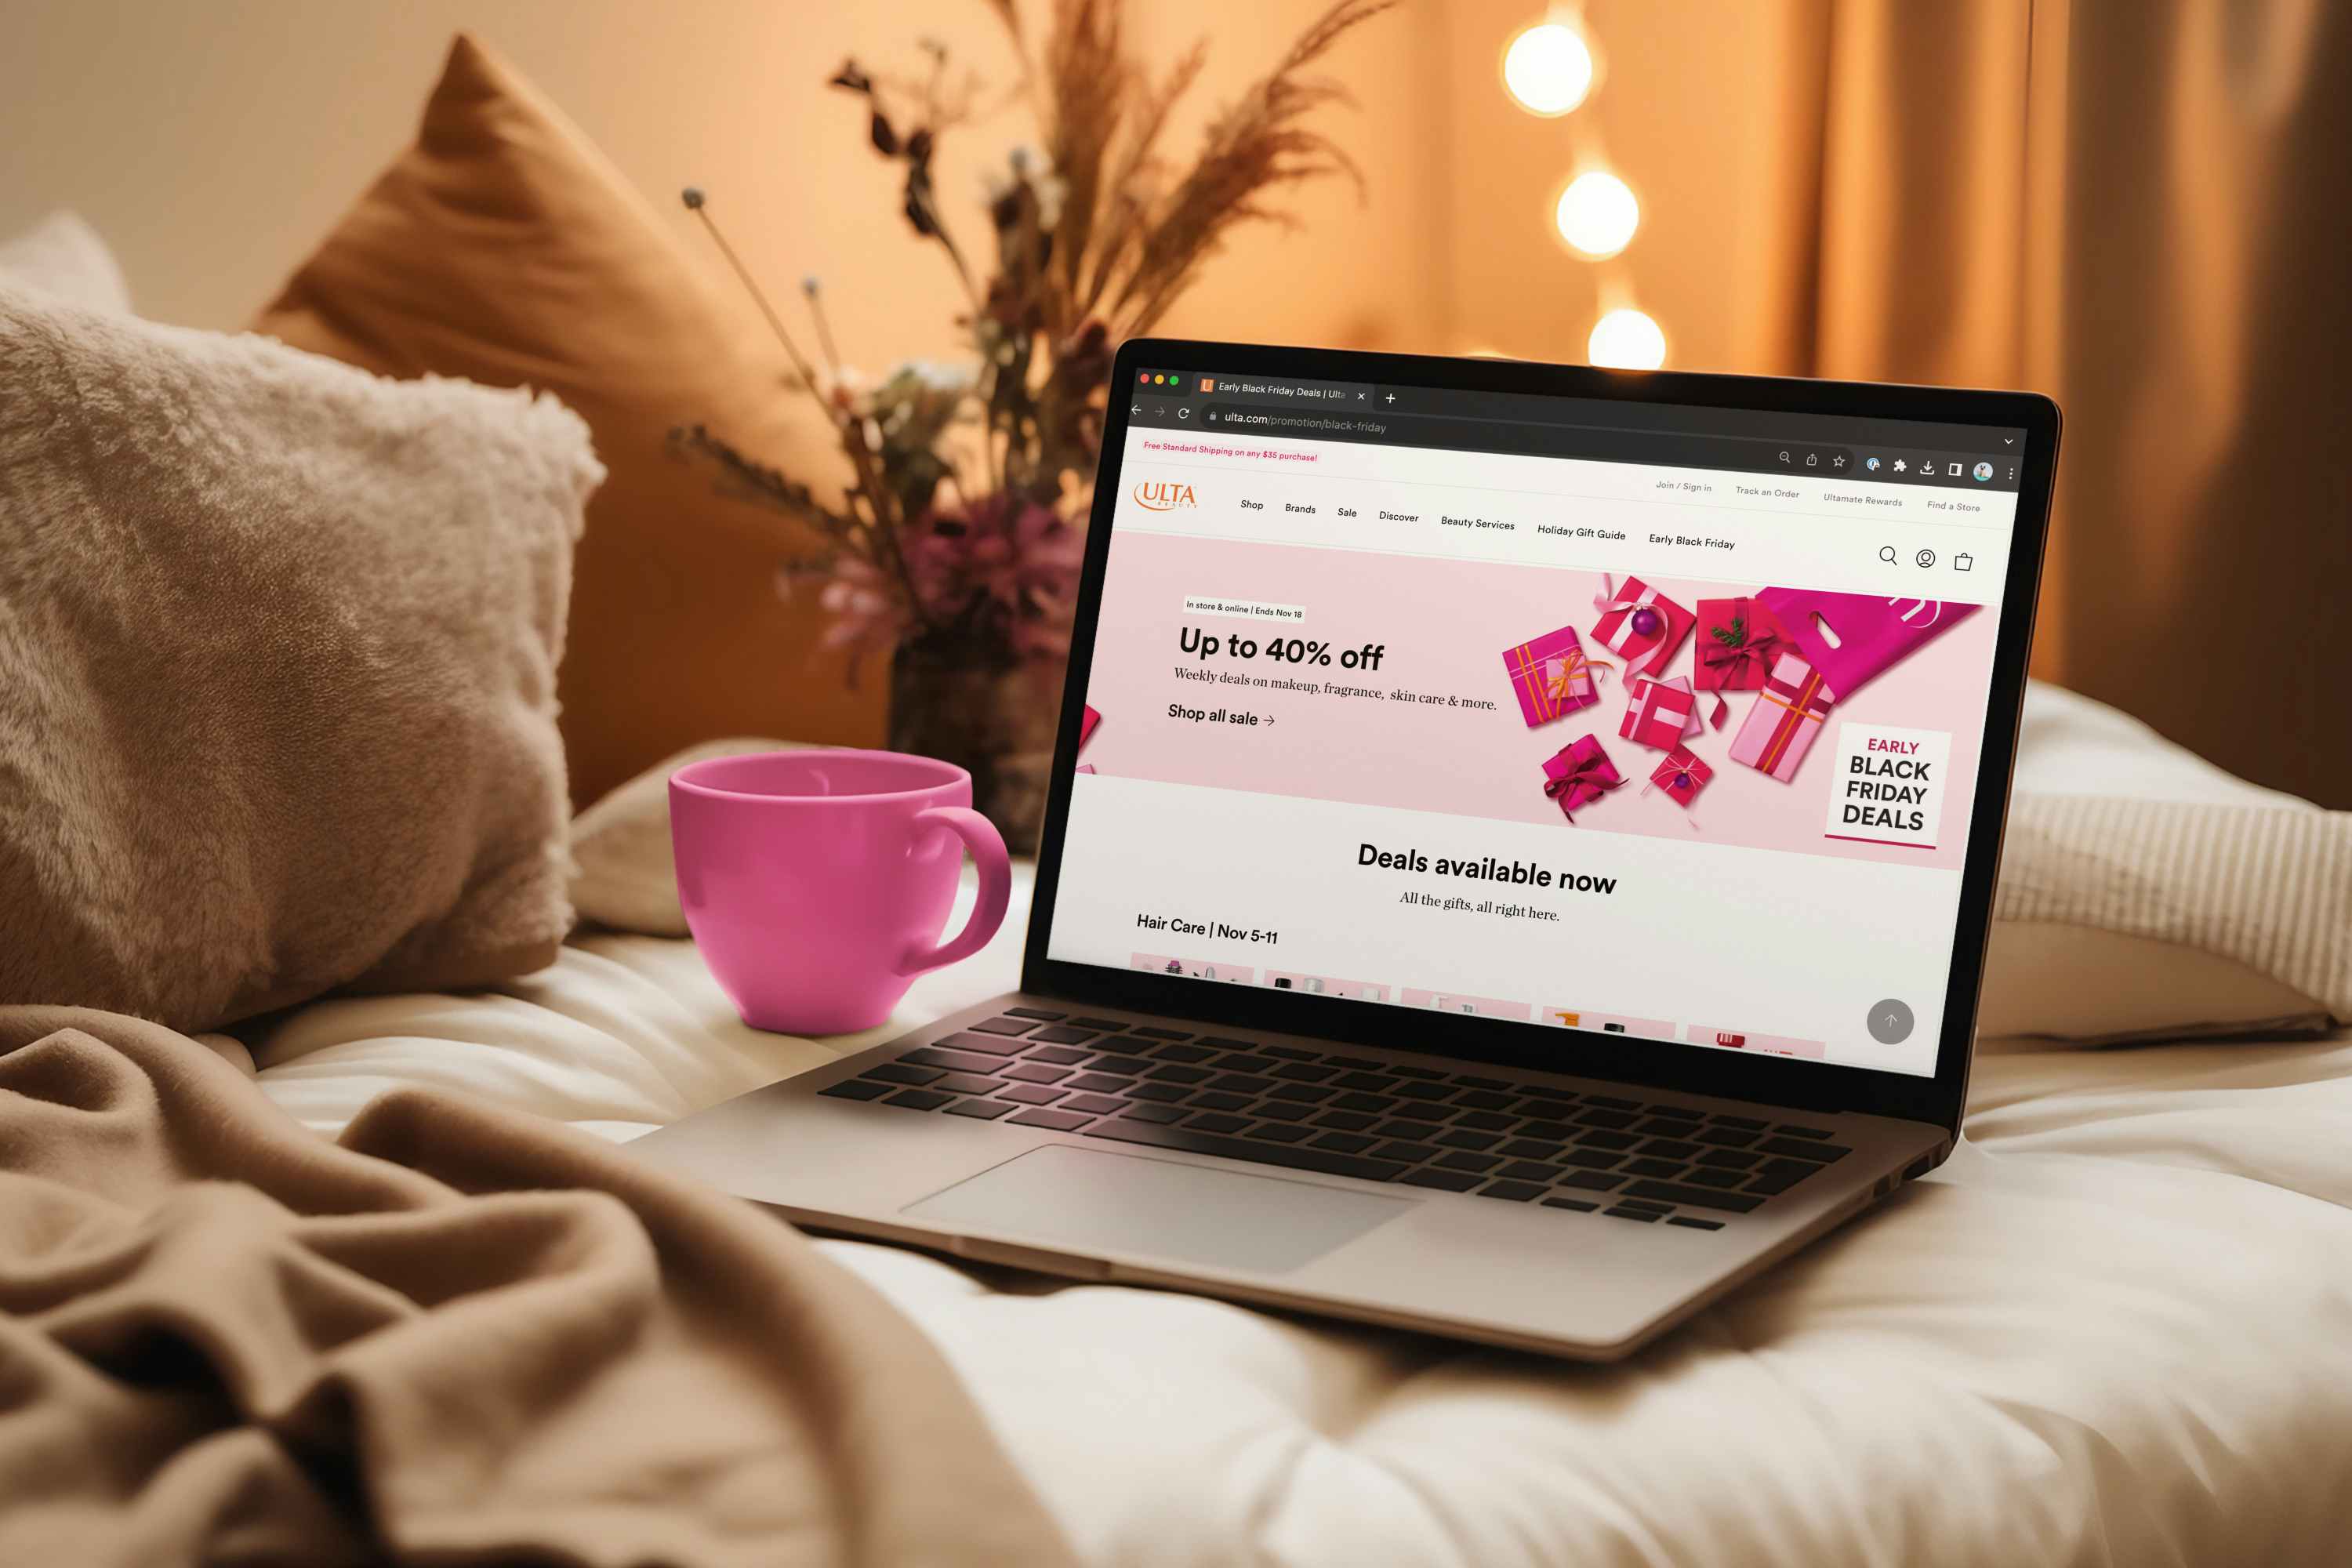 a laptop on a cozy bed, displaying the Ulta early black friday deals webpage